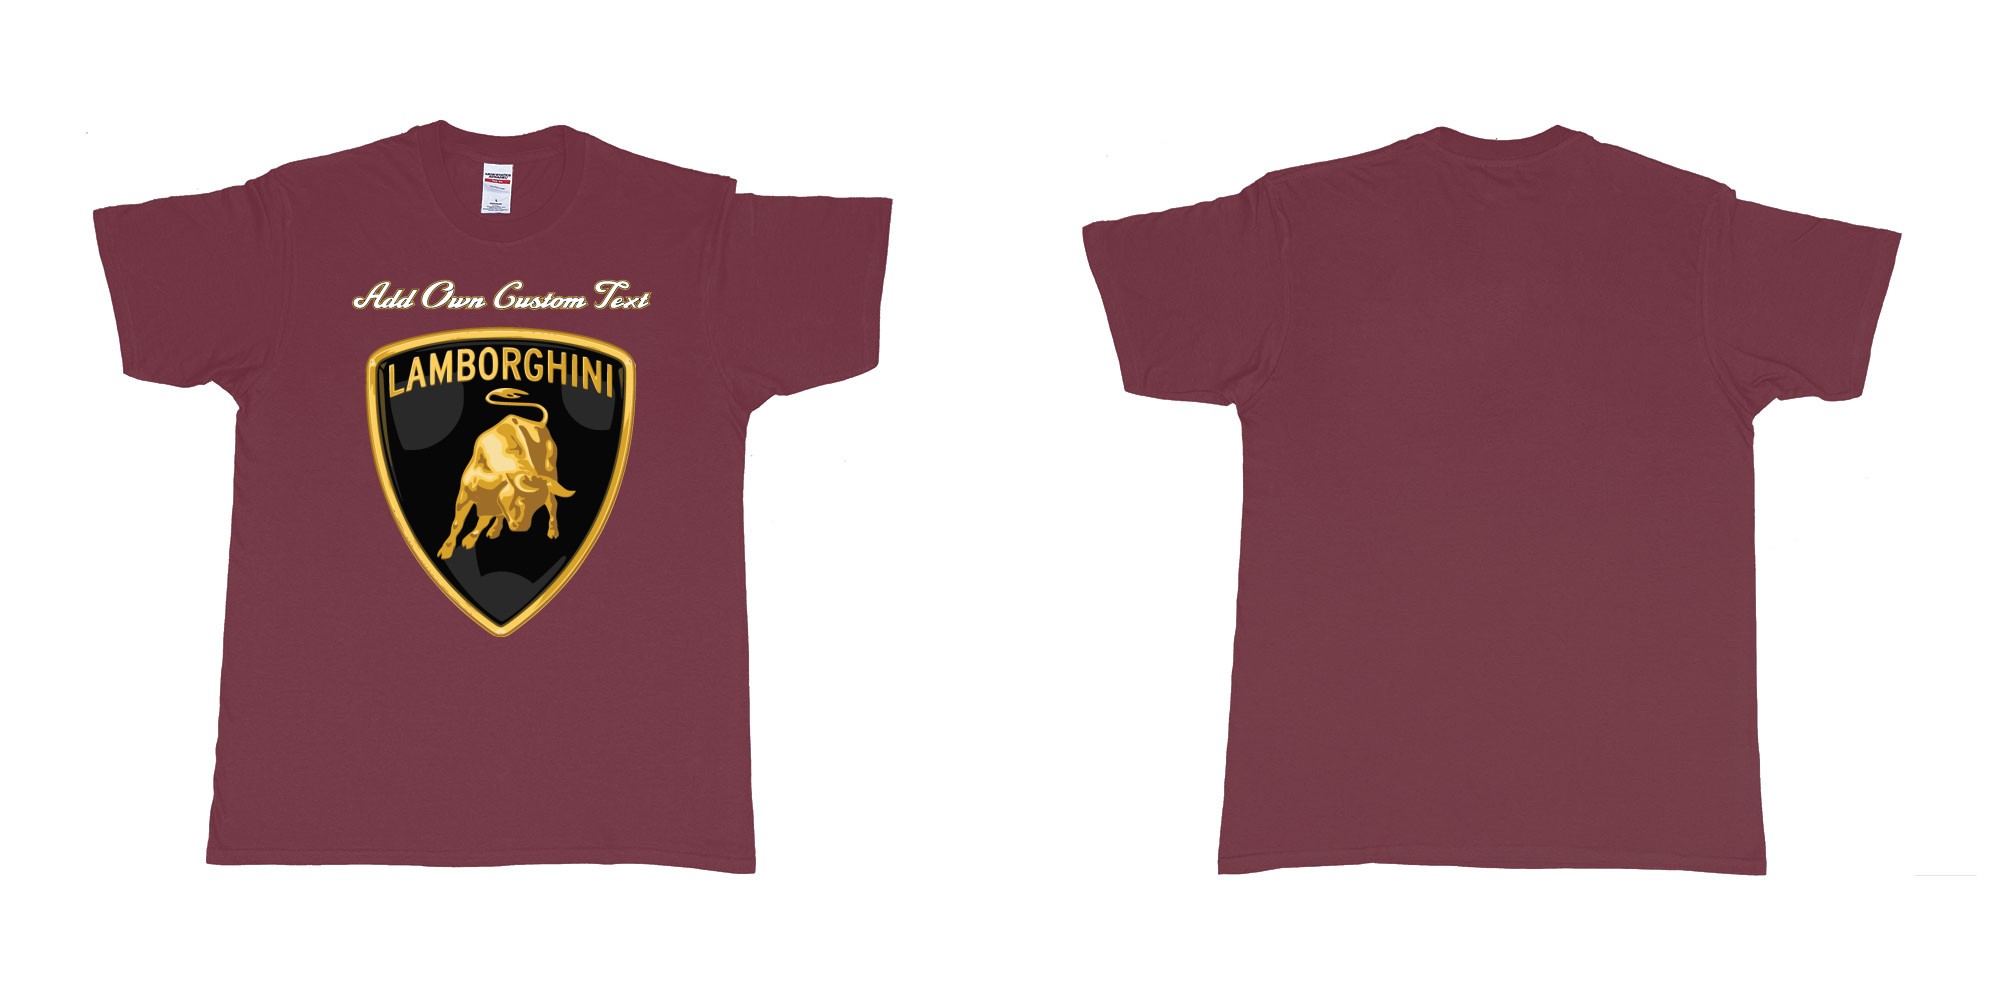 Custom tshirt design lamborghini logo tshirt printing add own text in fabric color marron choice your own text made in Bali by The Pirate Way